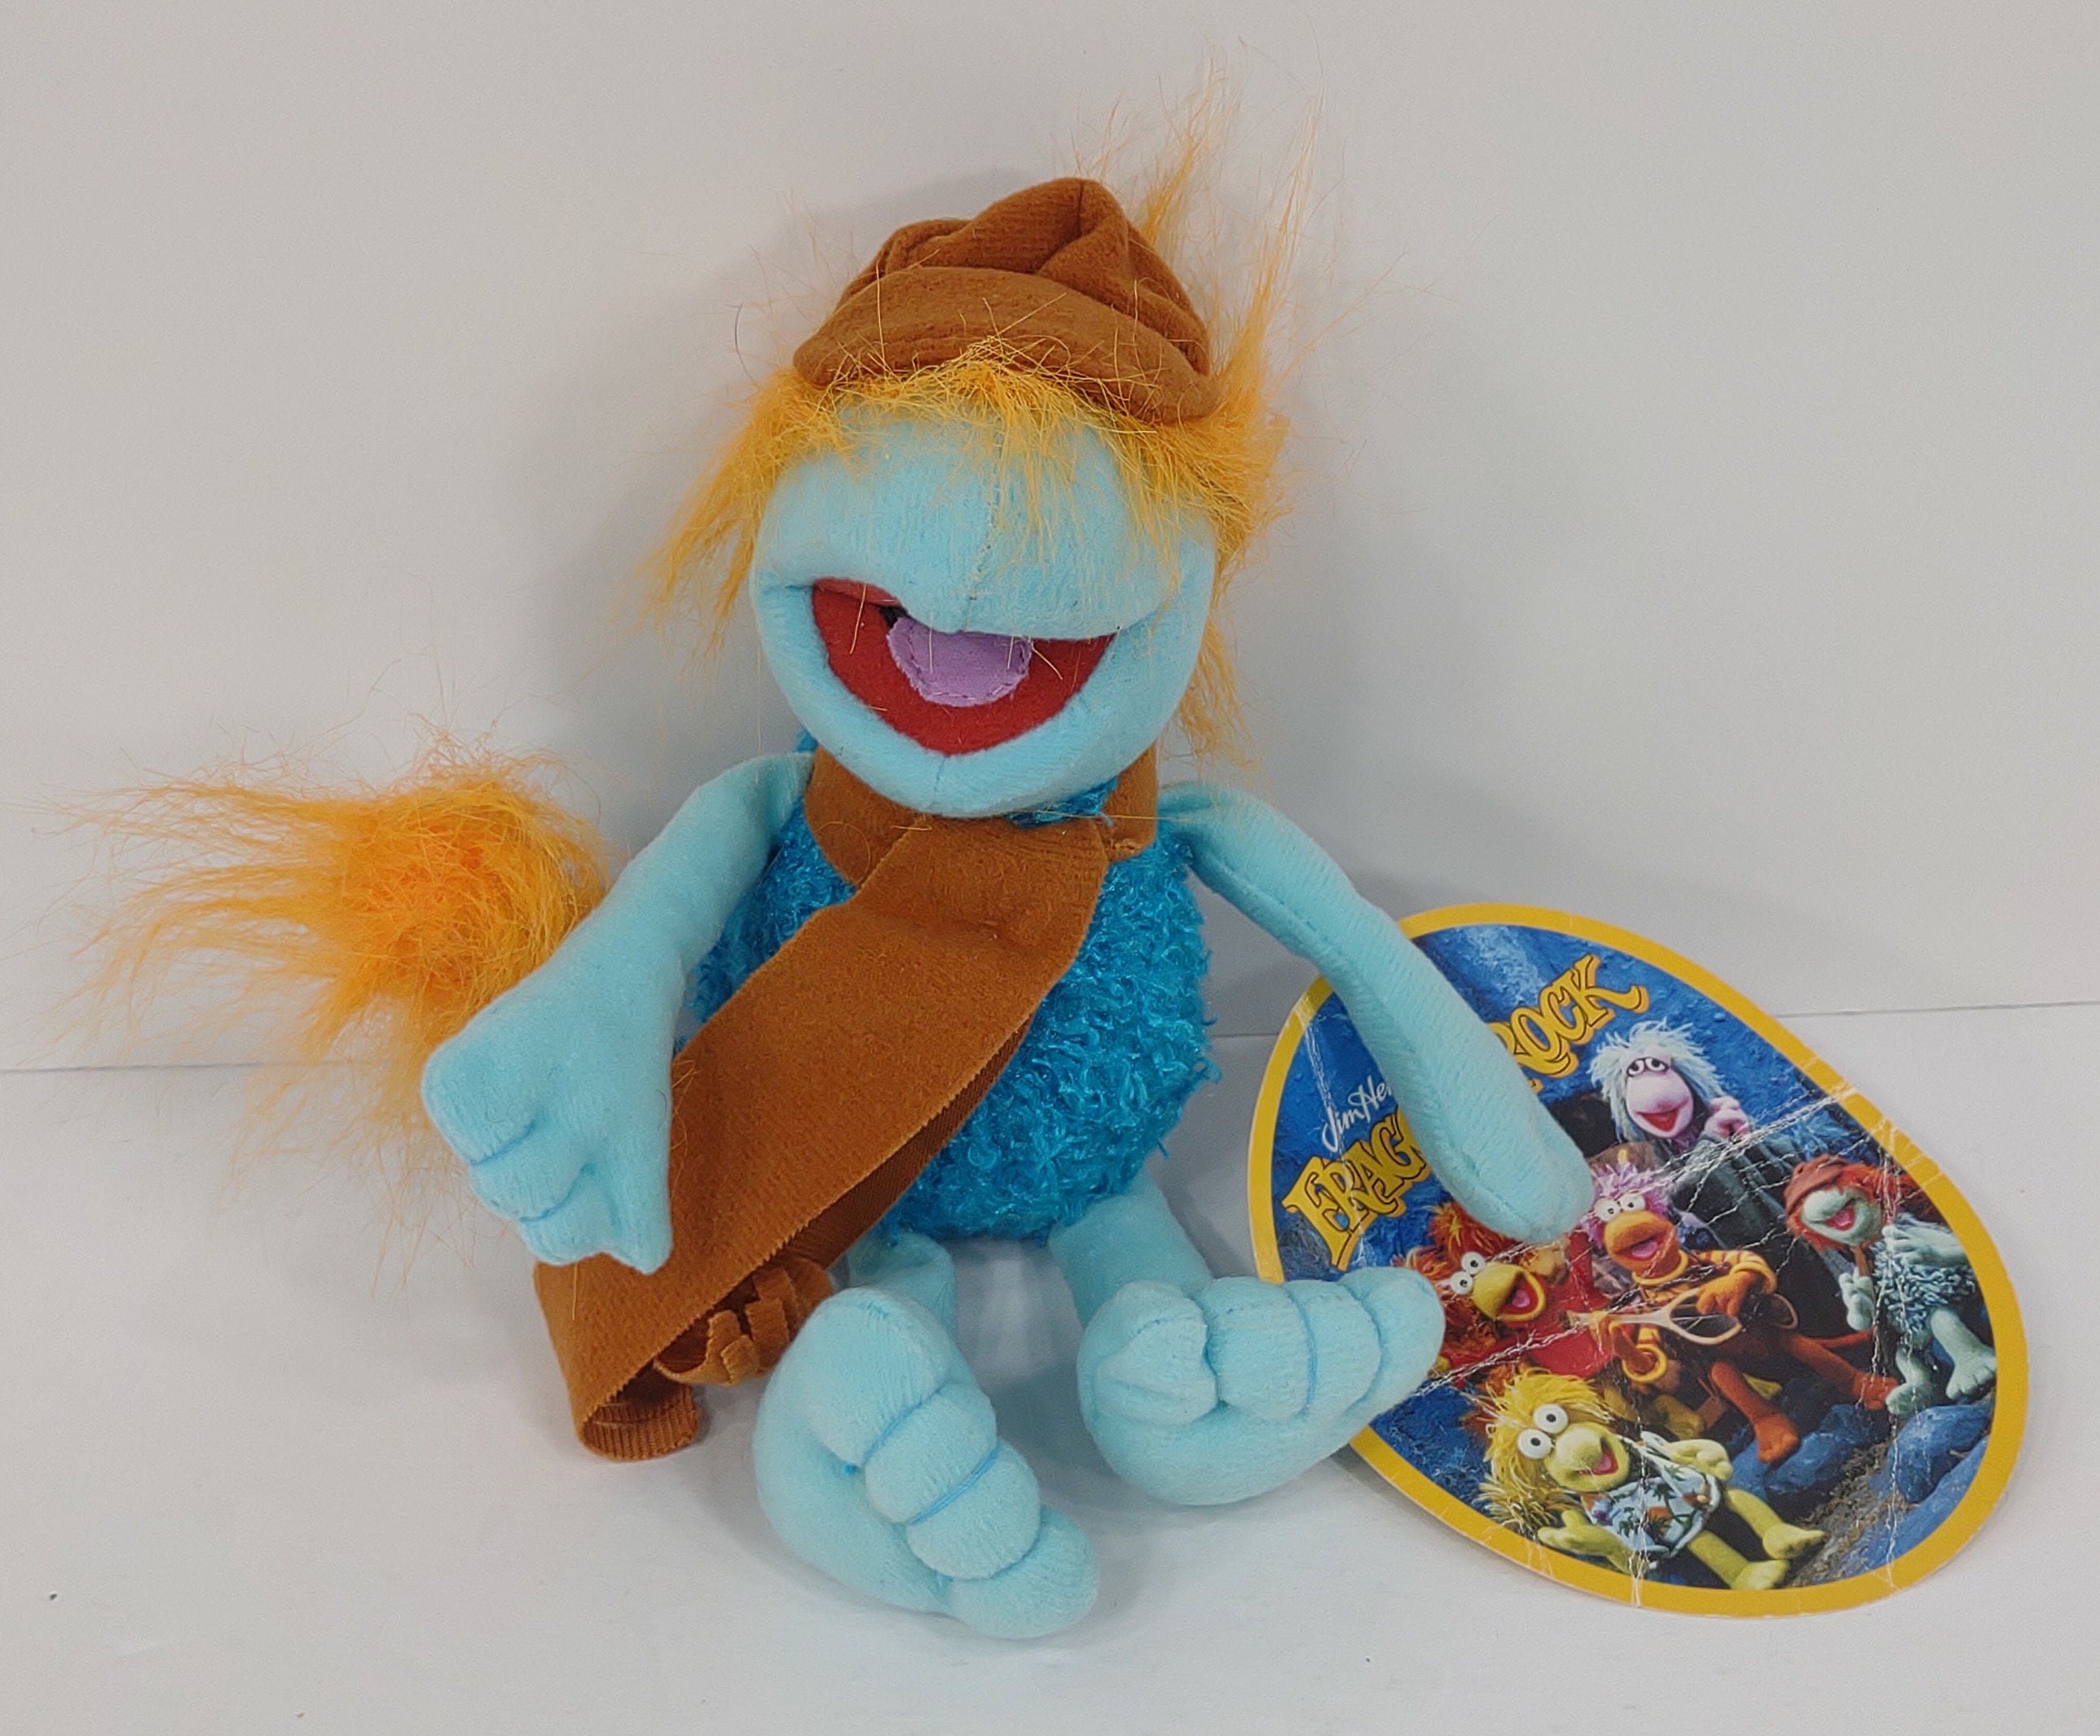 Fraggle Rock Blue Hair Plush Toy - wide 8